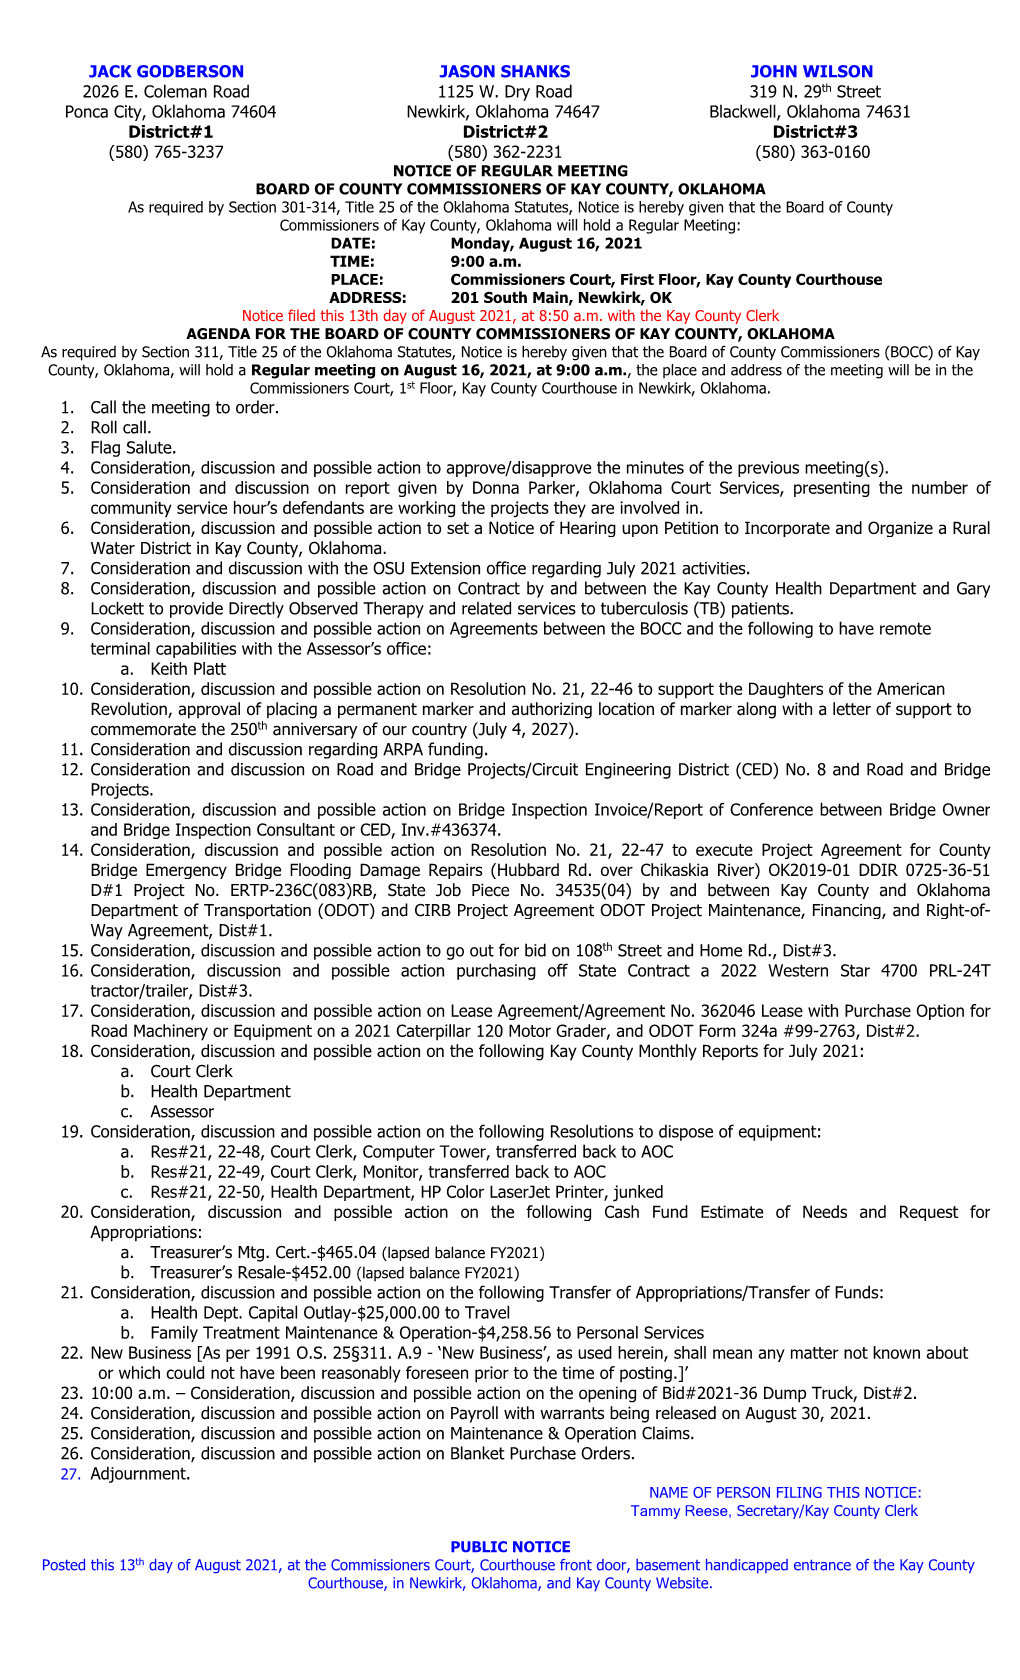 Board of County Commissioners Regular Meeting Agenda